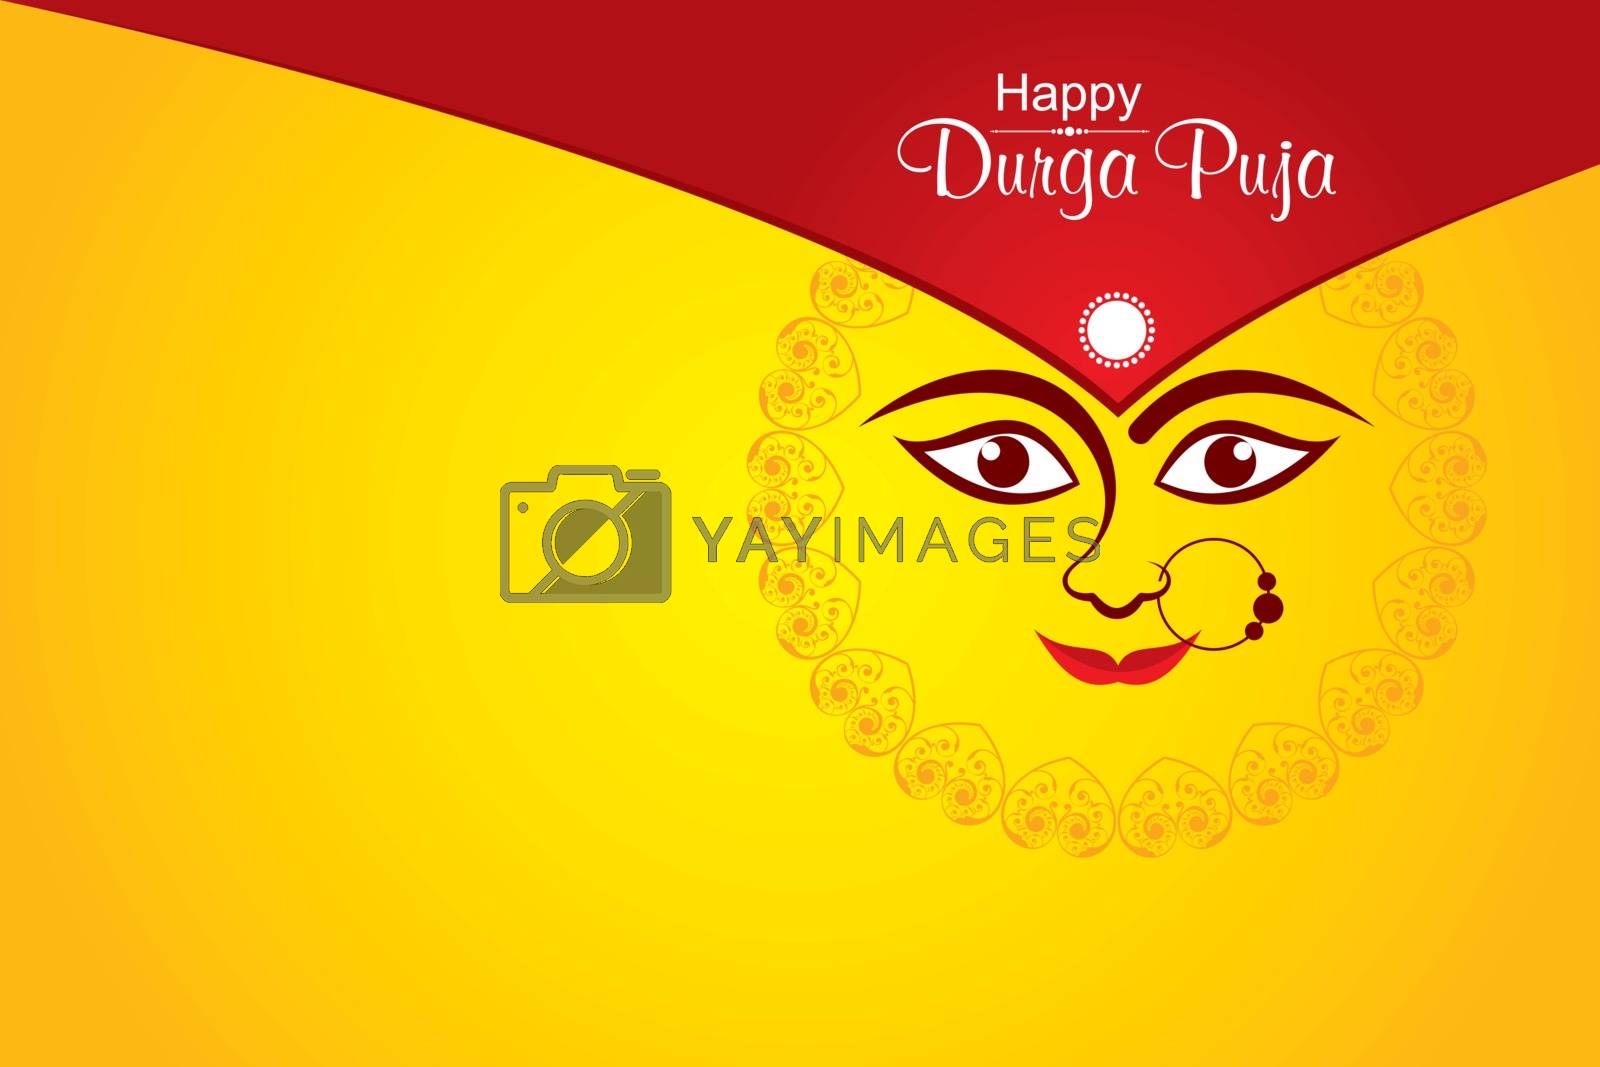 Royalty free image of Navratri utsav greeting card which is celebrate in India by graphicsdunia4you